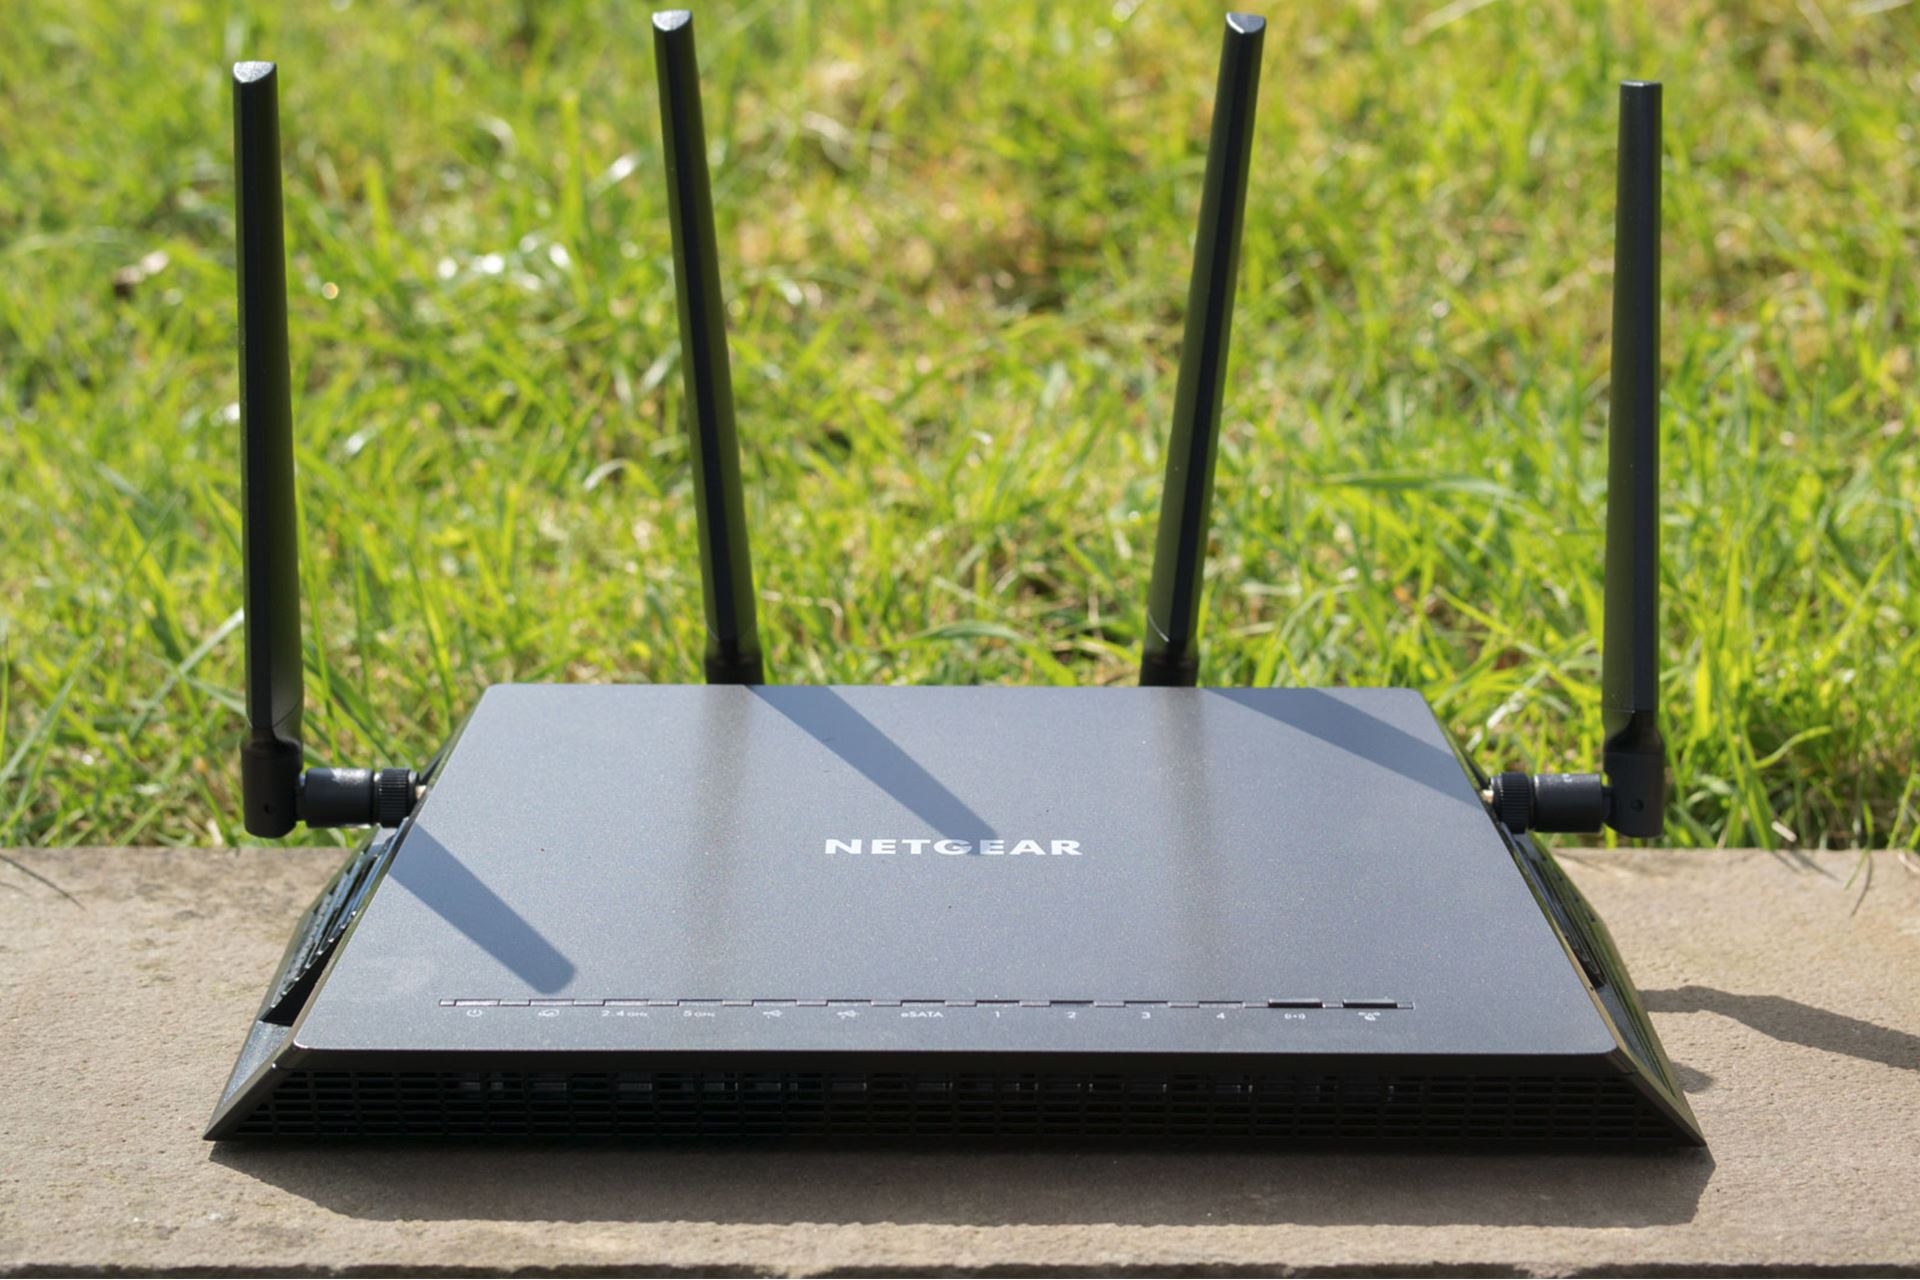 How To Set Up Two Netgear Routers